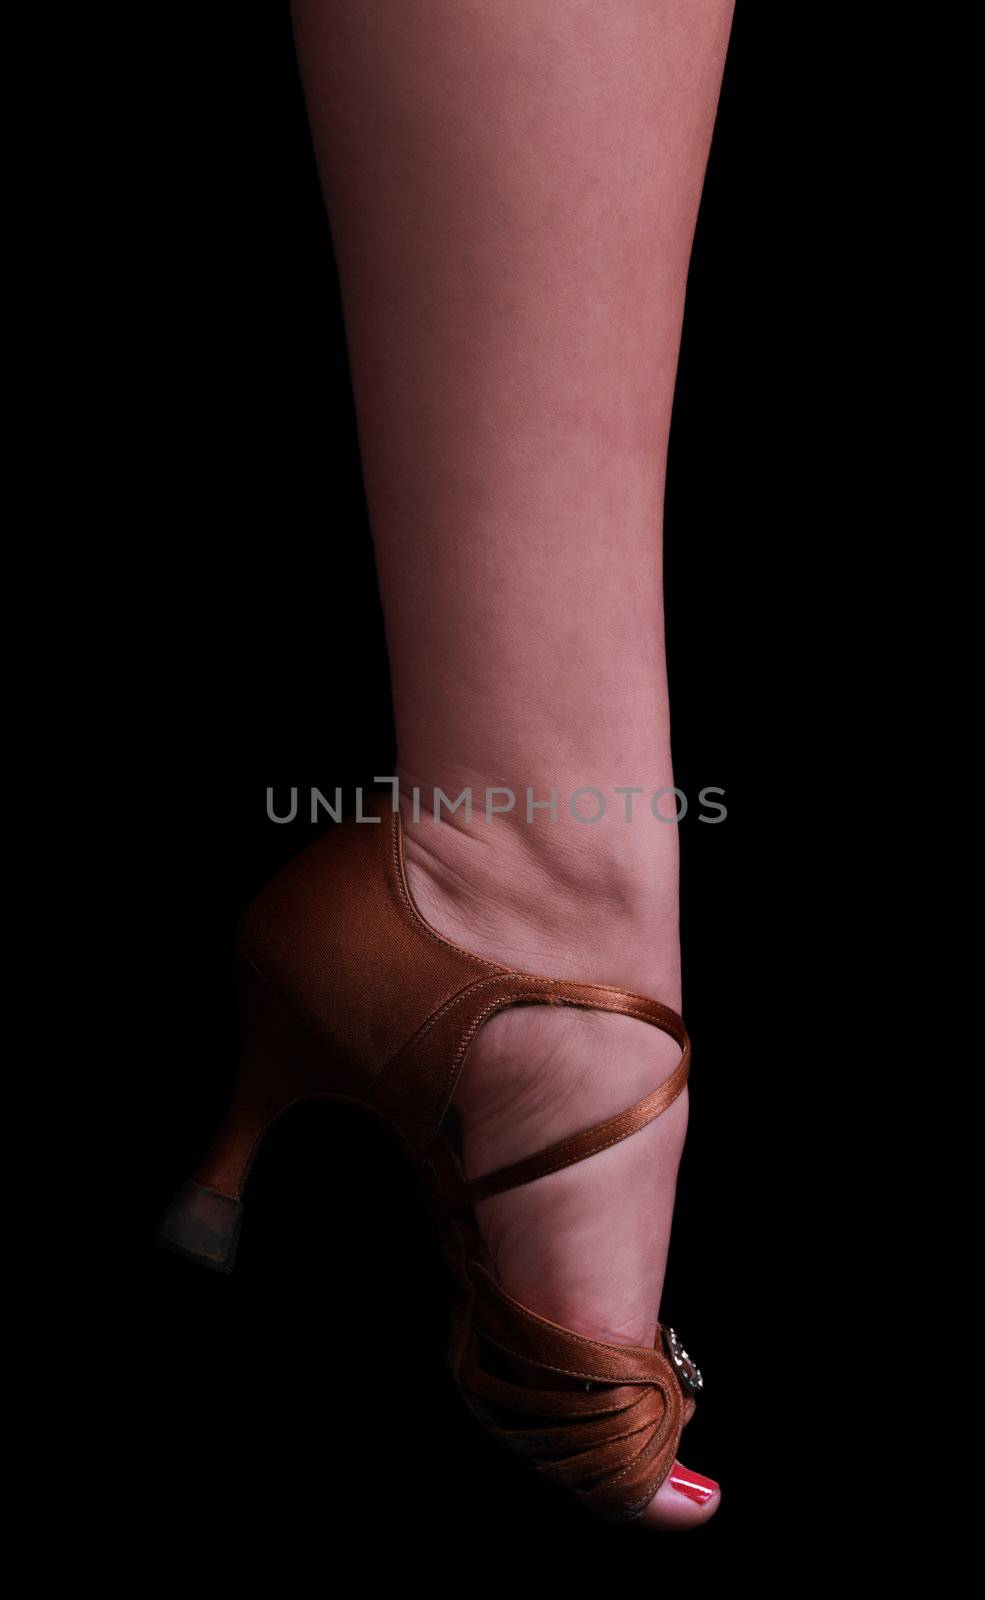 The foot of a female dancer in a high heel dancing sandal isolated aginst a black background.